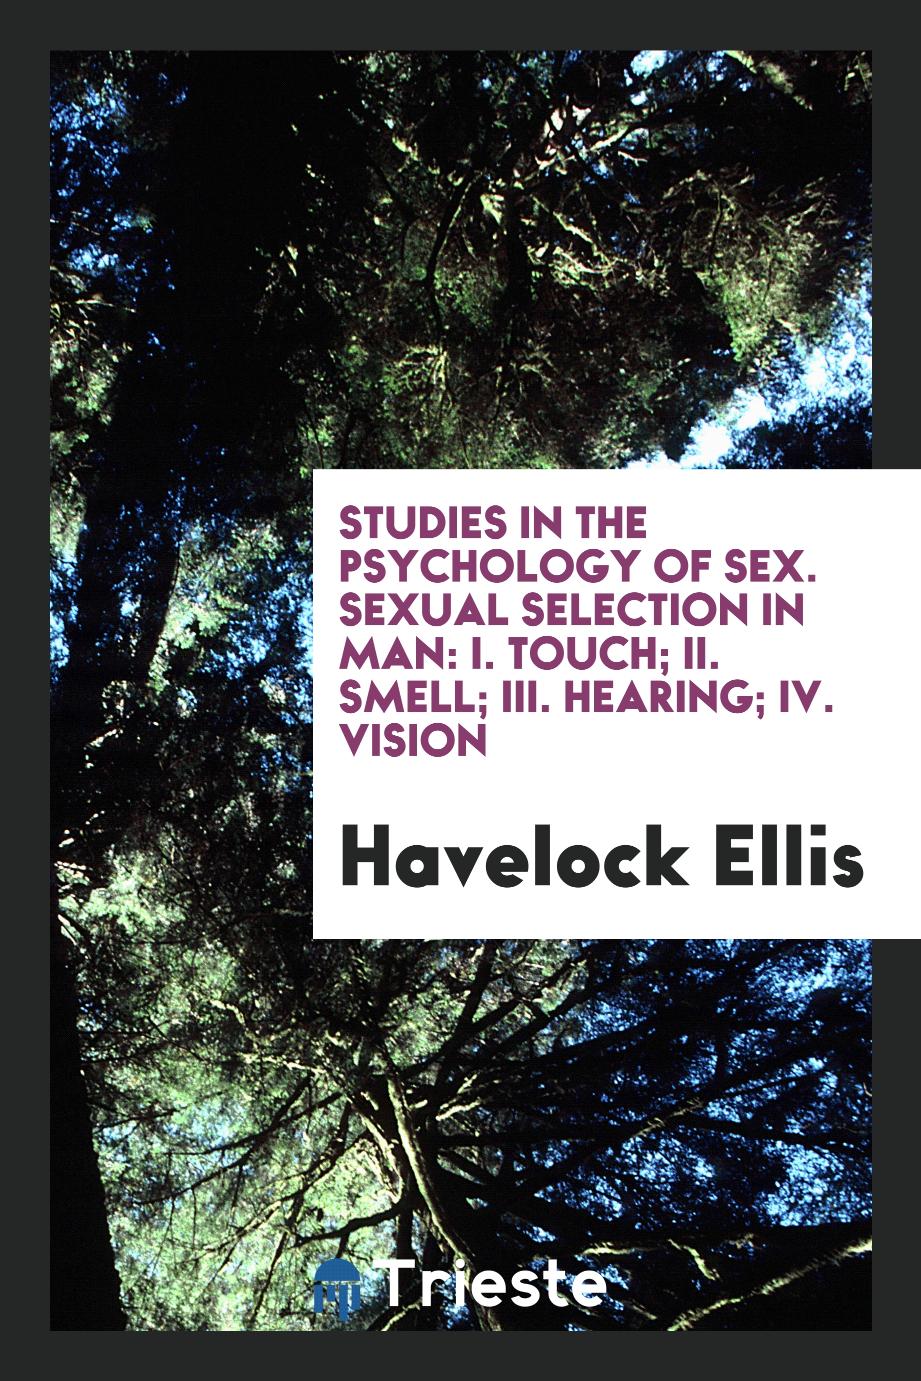 Studies in the Psychology of Sex. Sexual Selection in Man: I. Touch; II. Smell; III. Hearing; IV. Vision